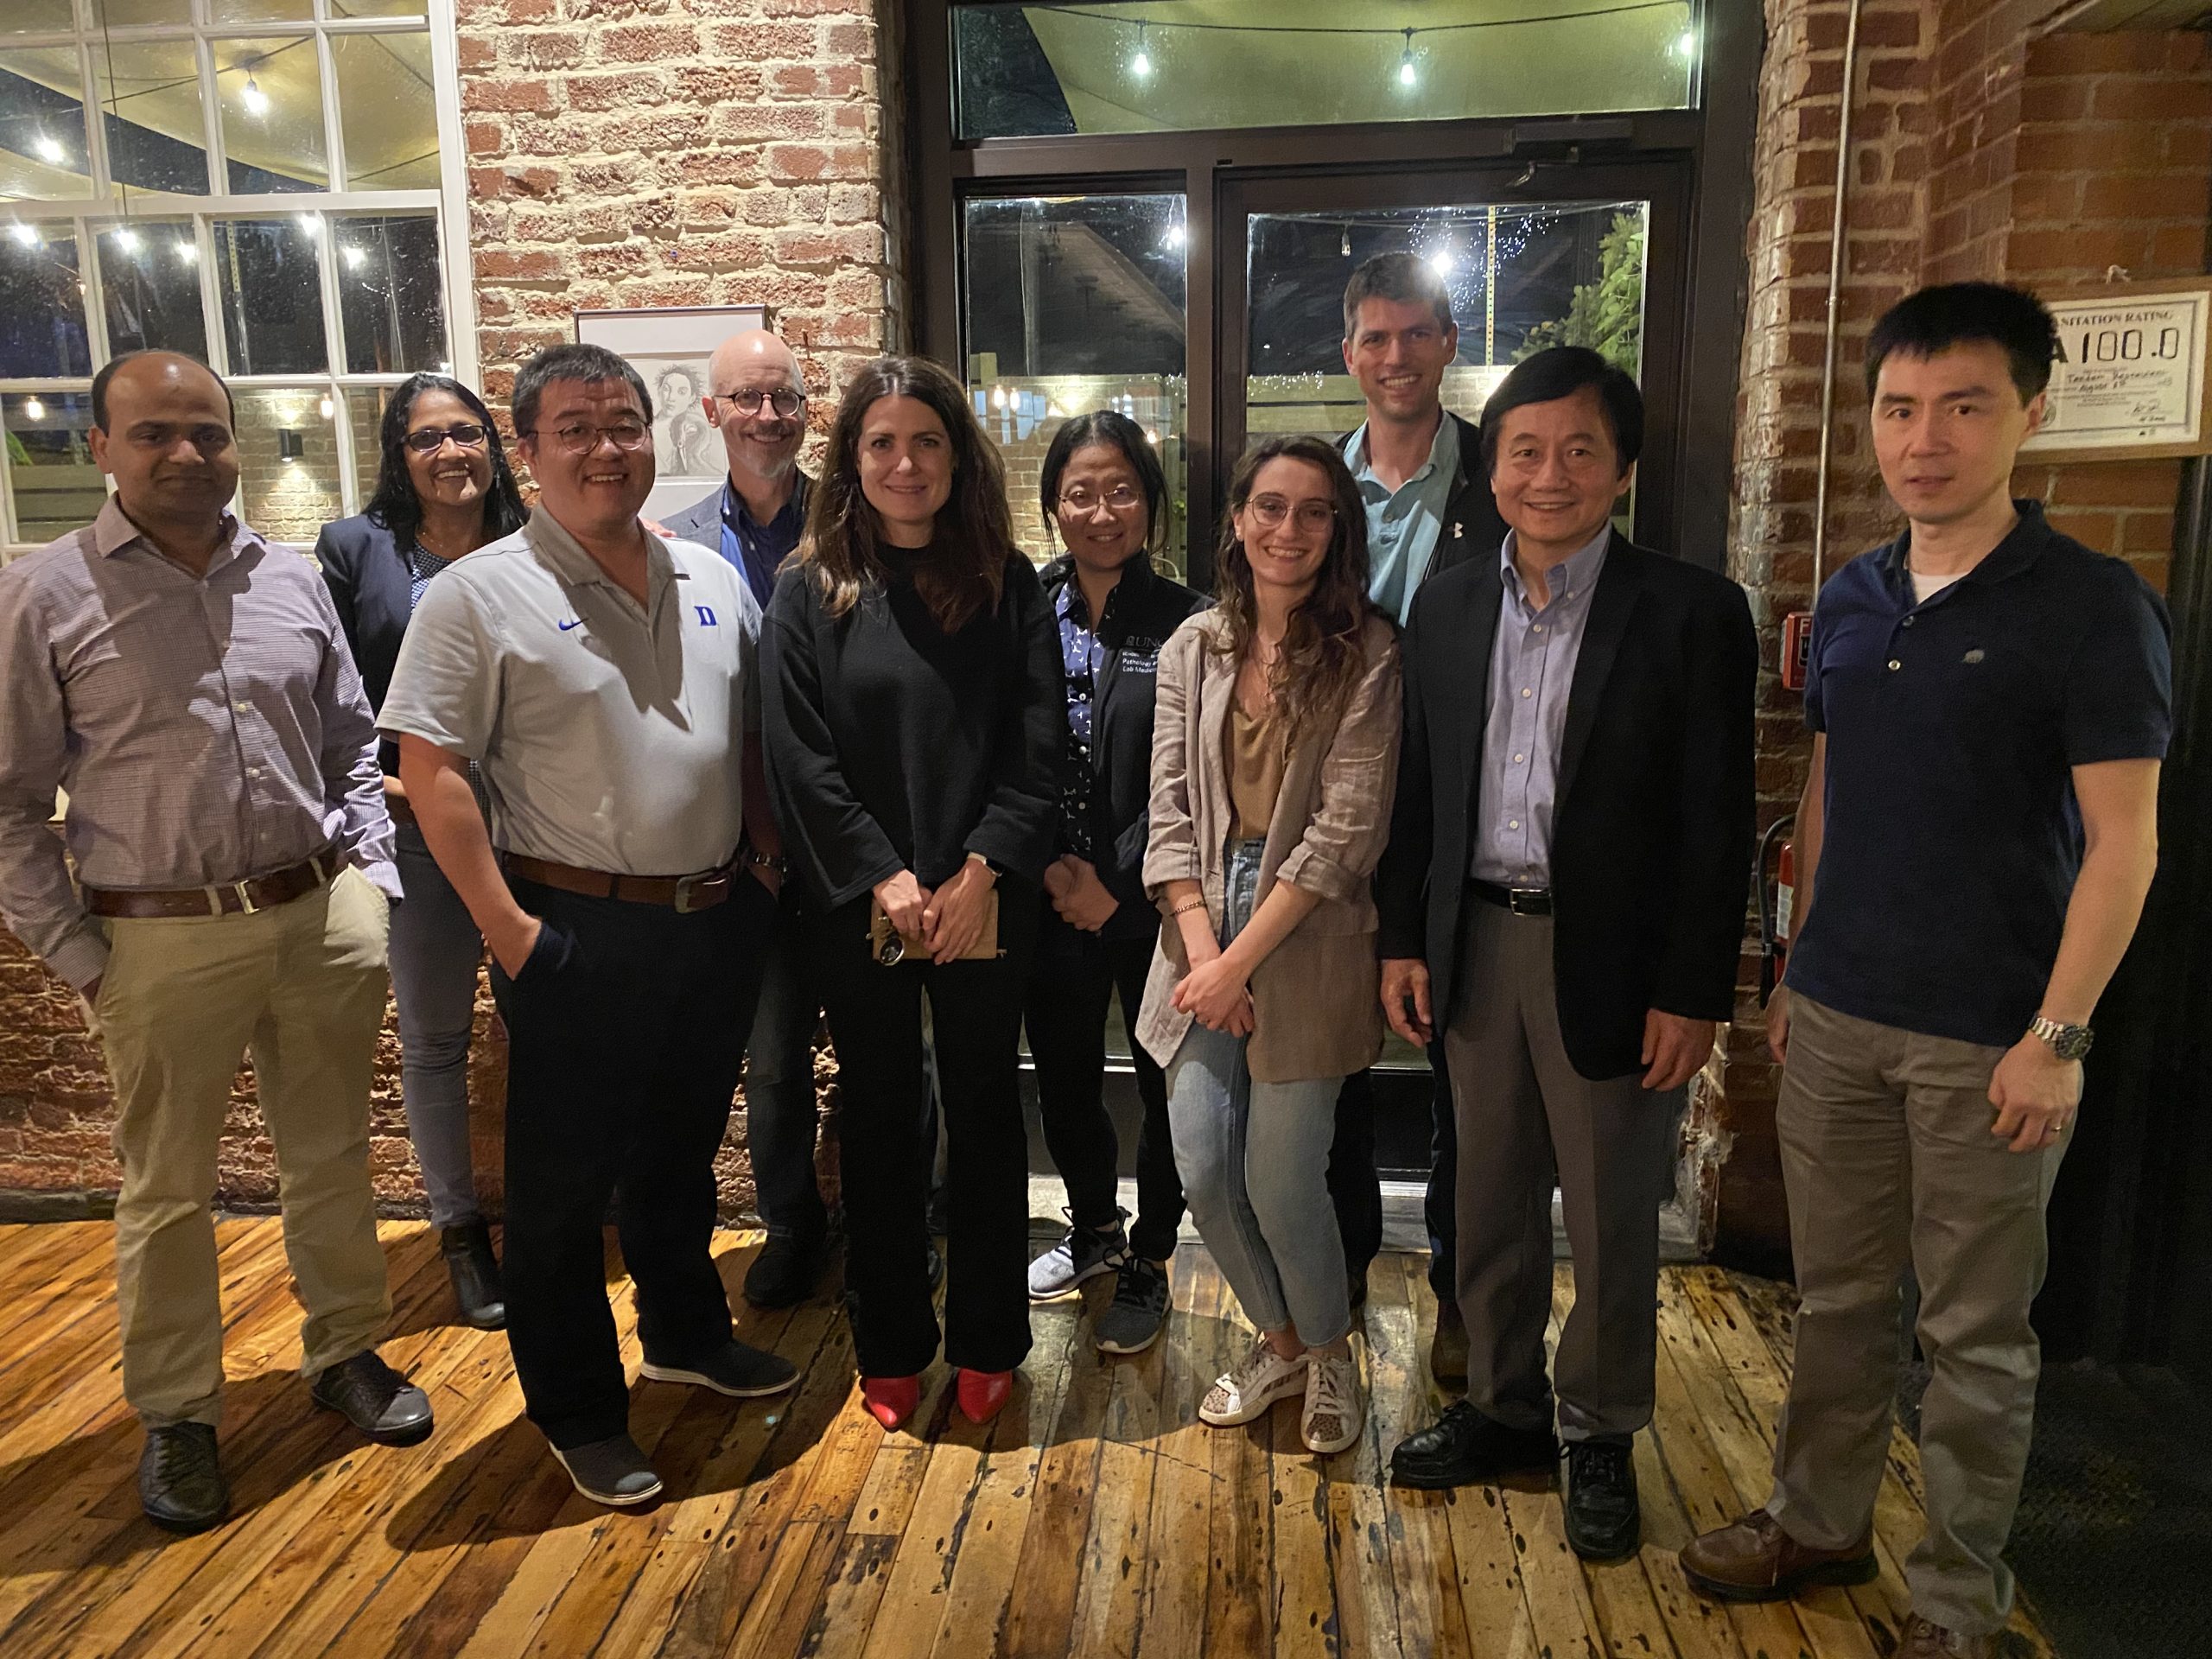 Keynotes and invited speakers dinner at Tandem Carrboro